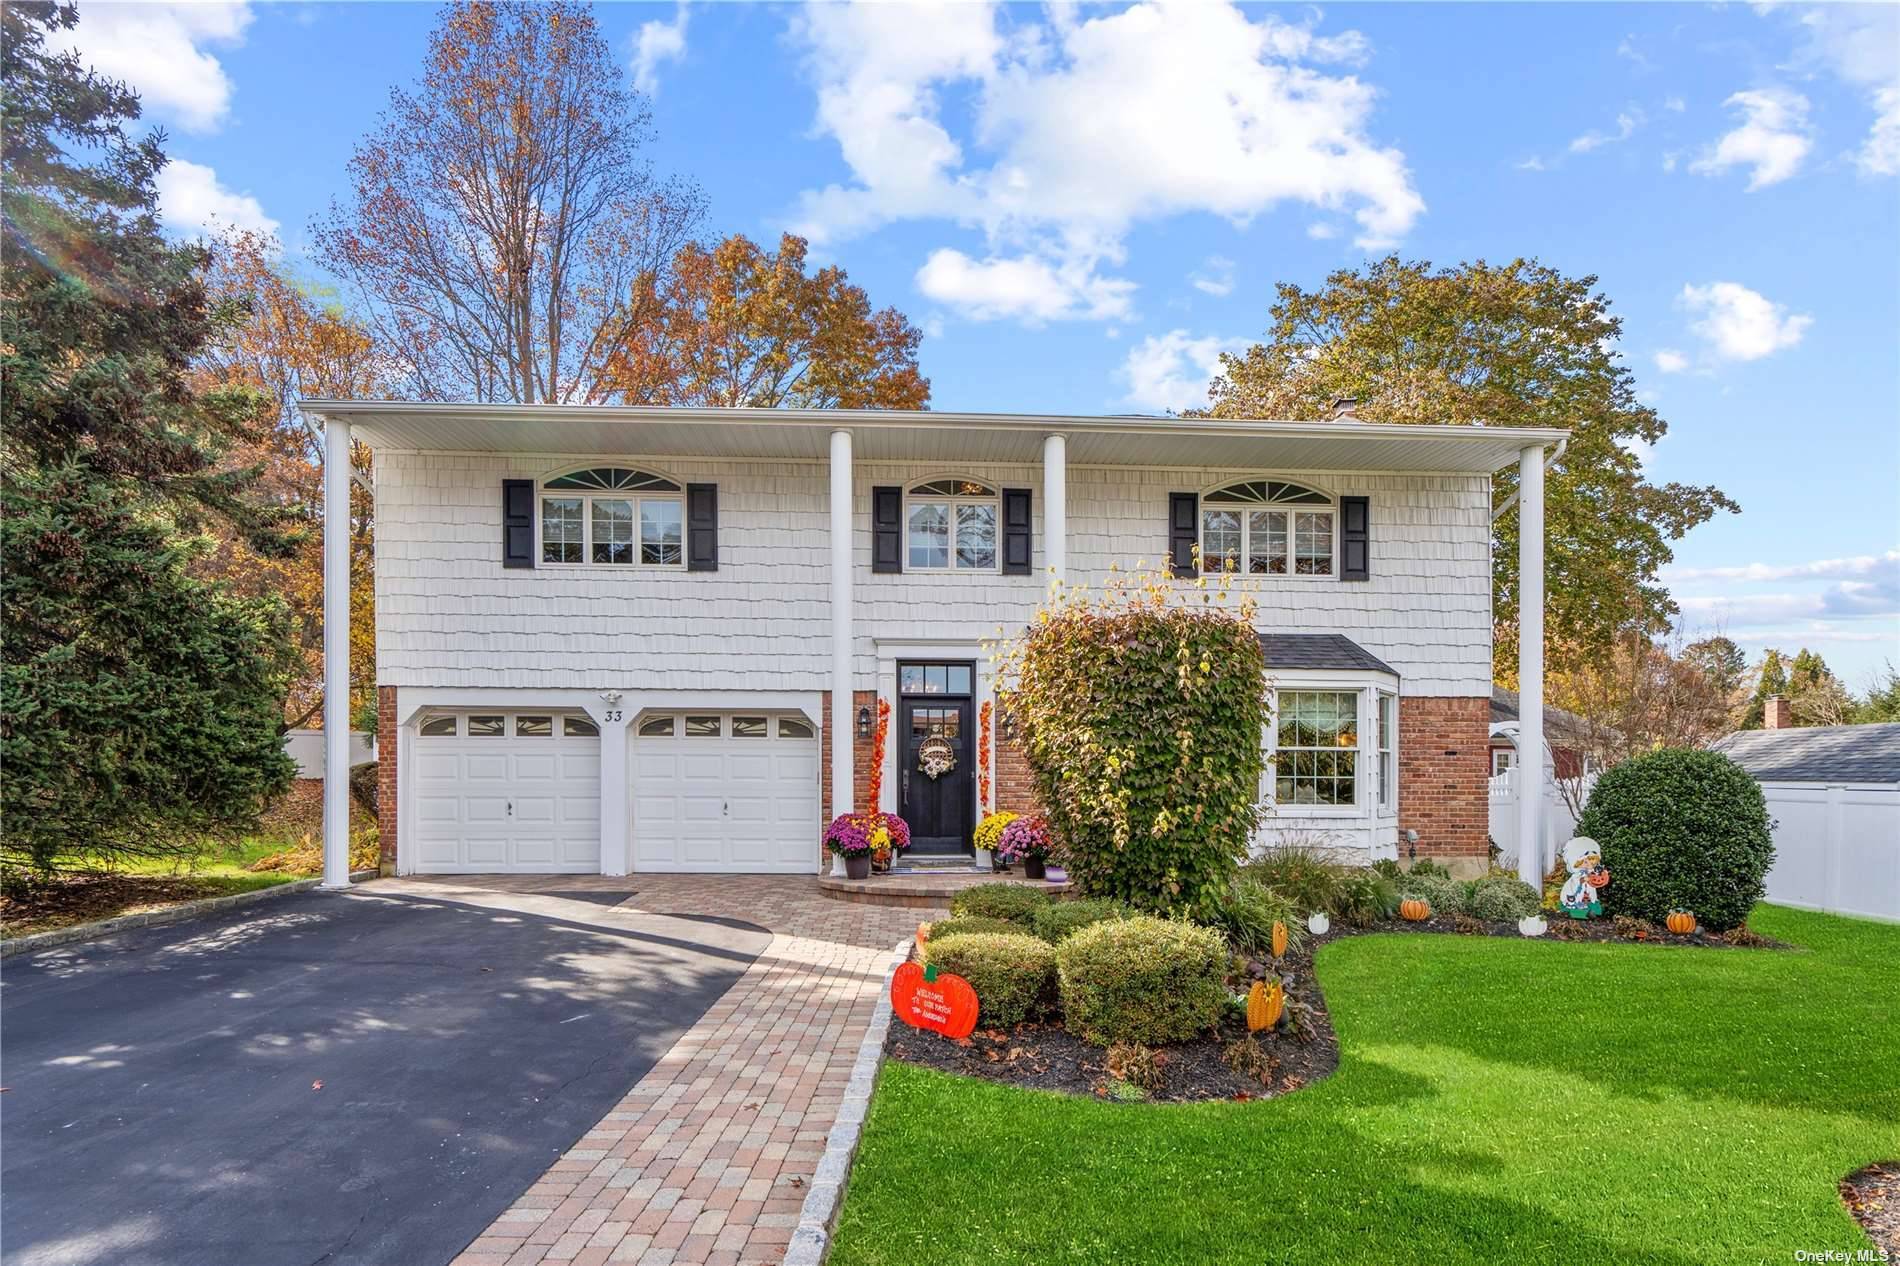 Stunning amp ; Impeccable Colonial Home offers 5 Bedroom, 2.